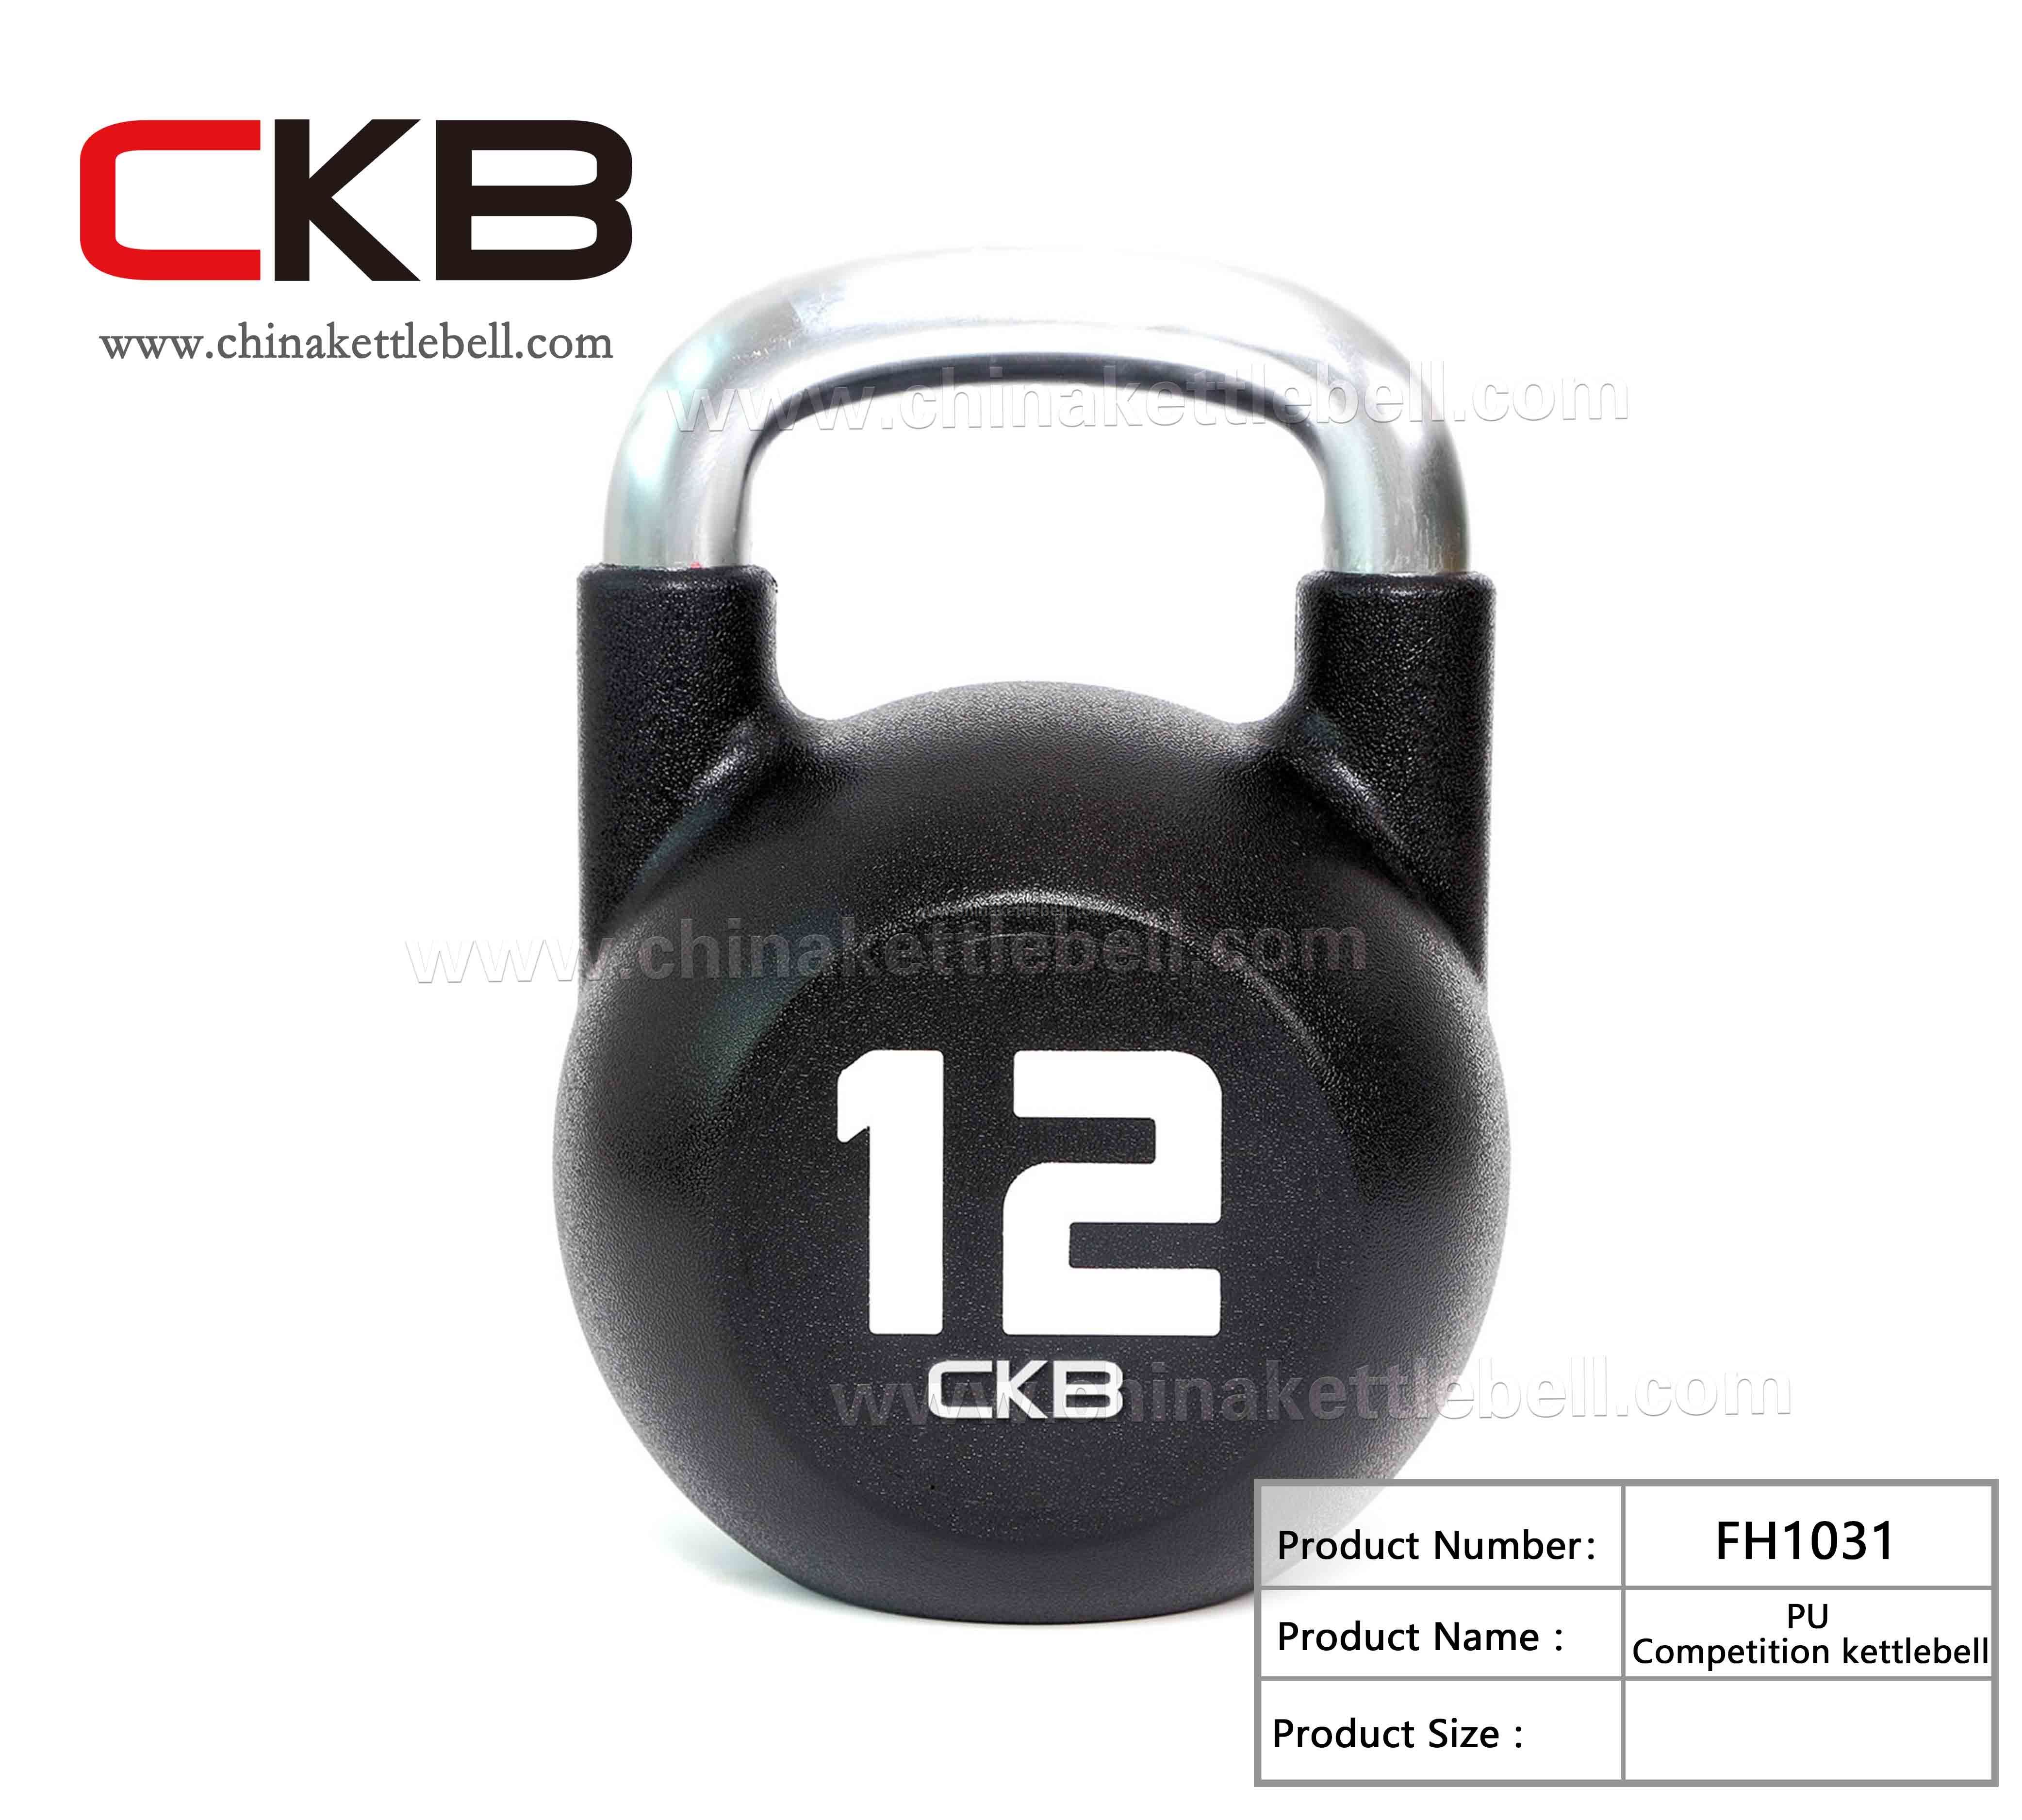 PU Competition kettlebell